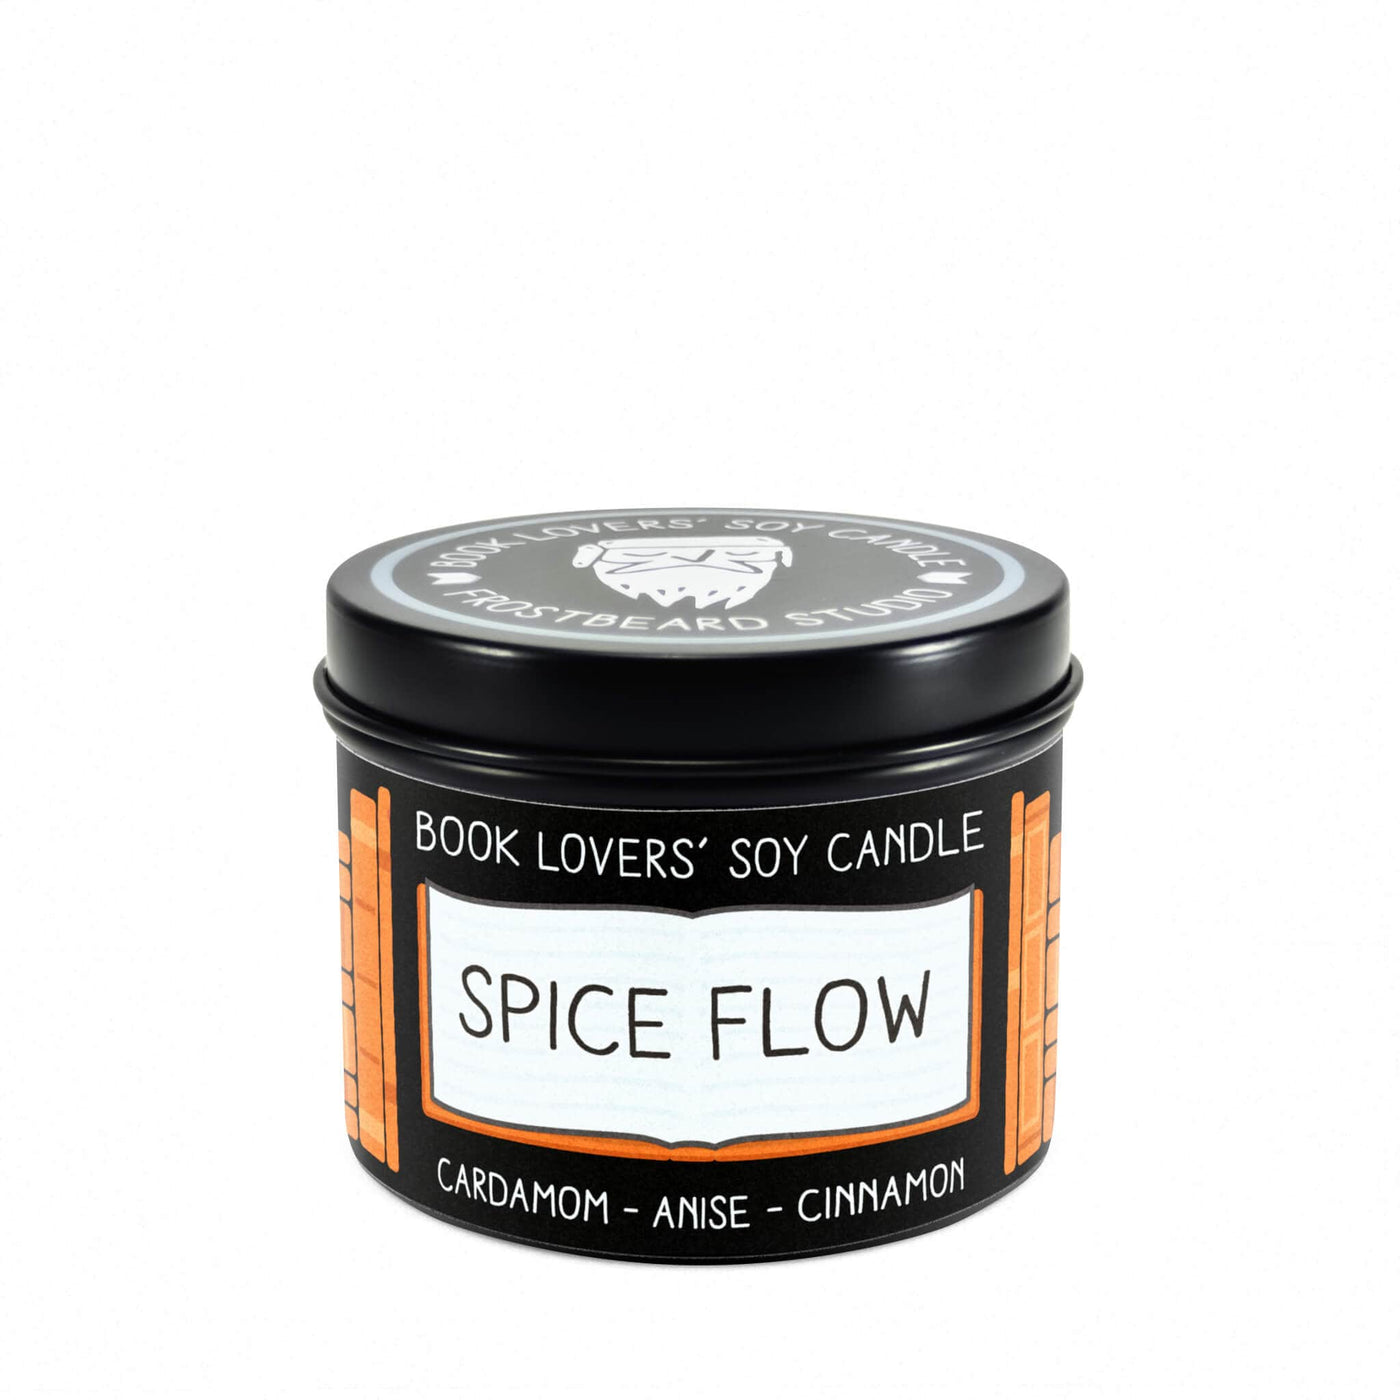 Spice Flow - 4 oz Tin - Book Lovers' Soy Candle - Frostbeard Studio